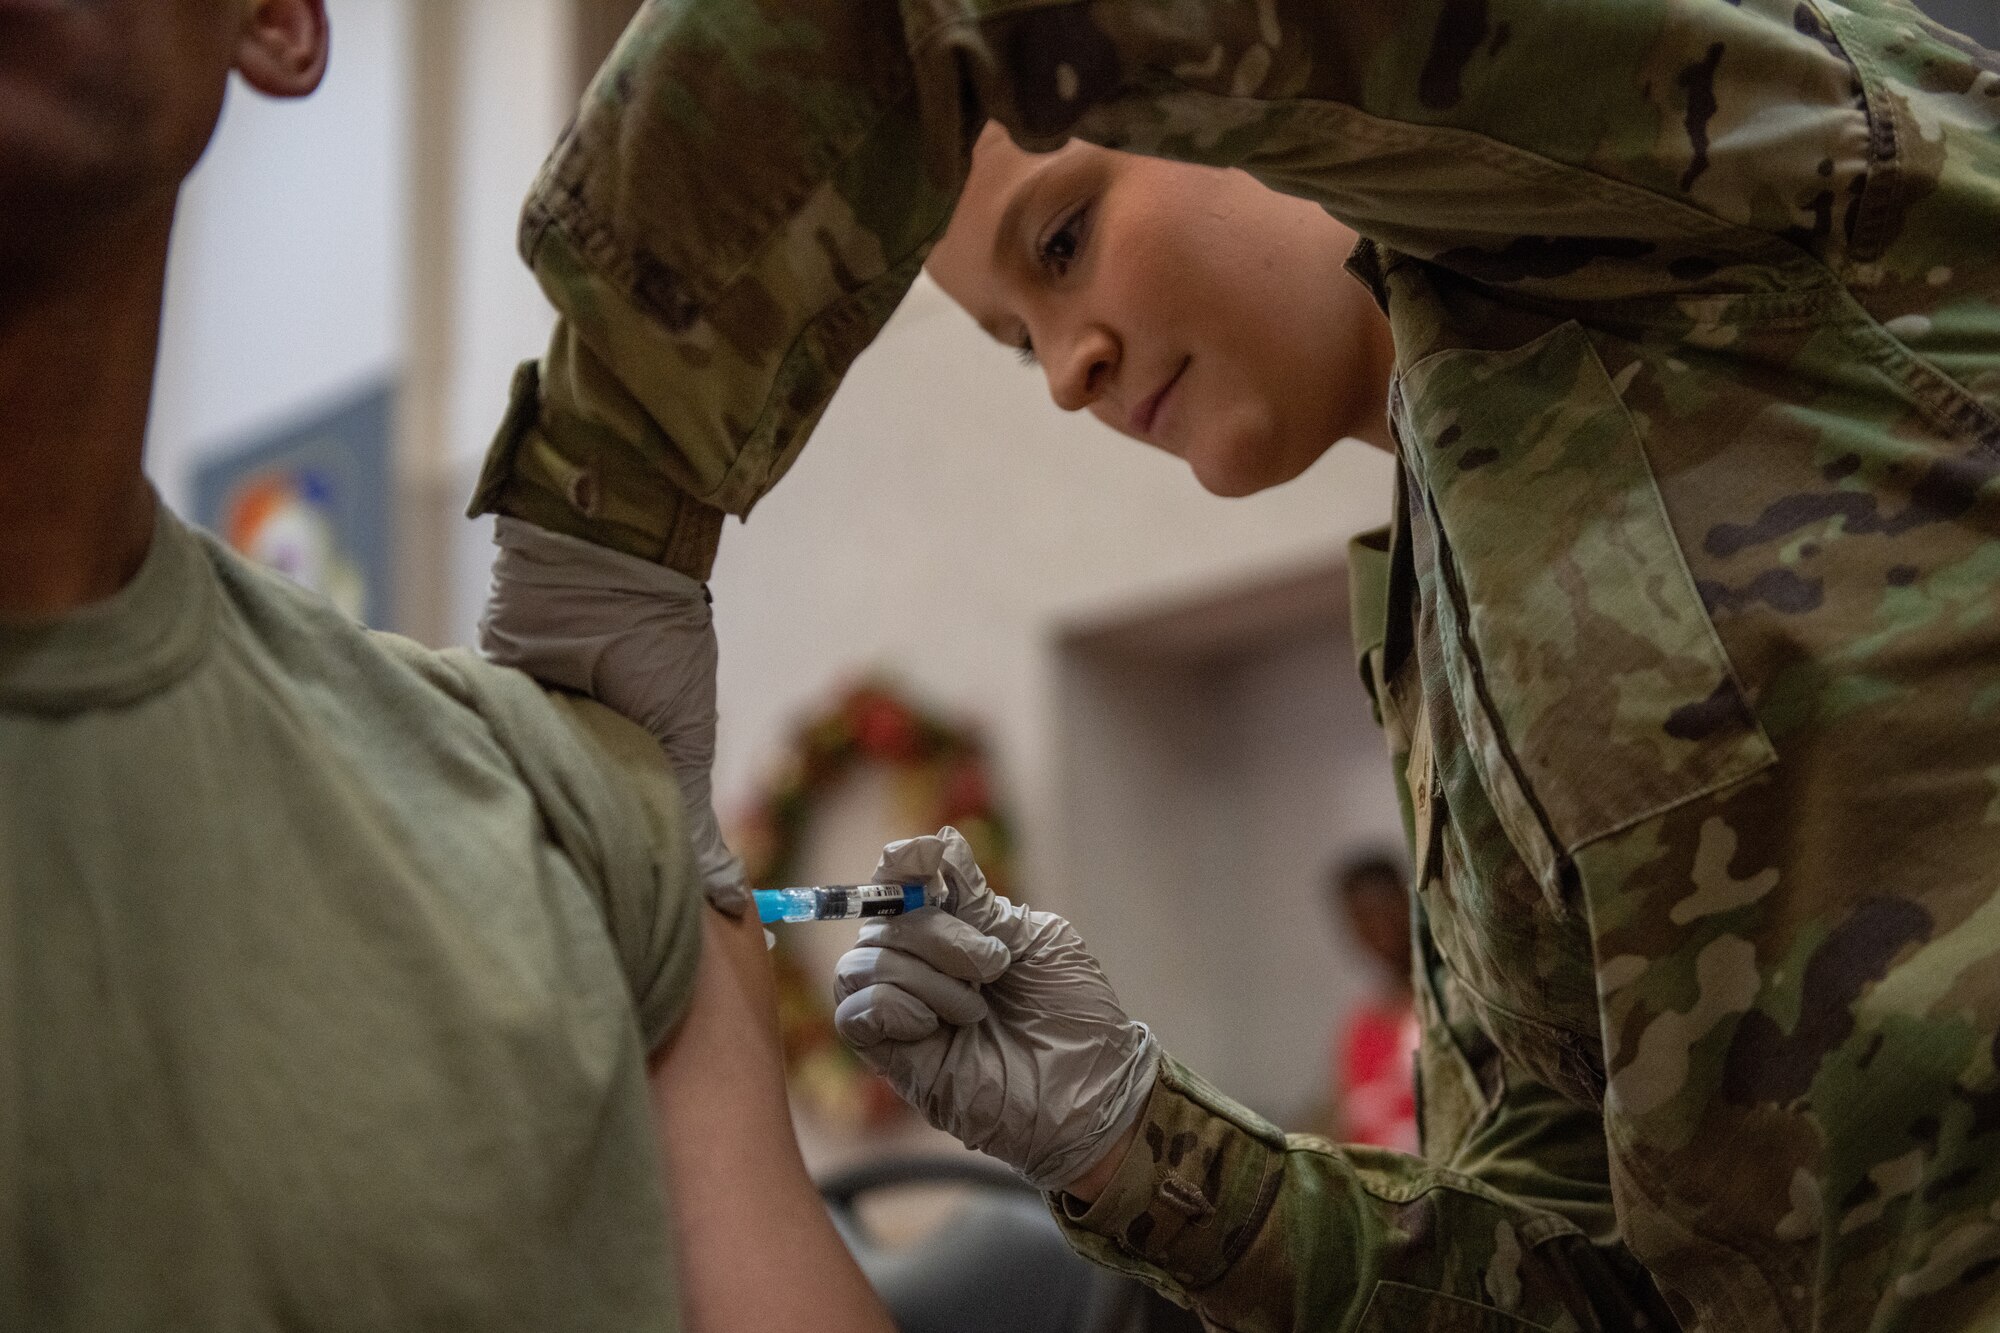 Senior Airman Sarah Mize, 22nd Medical Group aerospace medical technician, administers an influenza vaccine to a patient at a Flu Shot Point of Dispensing (POD) Oct. 18 2022, at McConnell Air Force Base, Kansas. PODs can be used for immunizations or dispensing medication quickly and efficiently in case of an emergency. (U.S. Air Force photo by Staff Sgt. Adam Goodly)